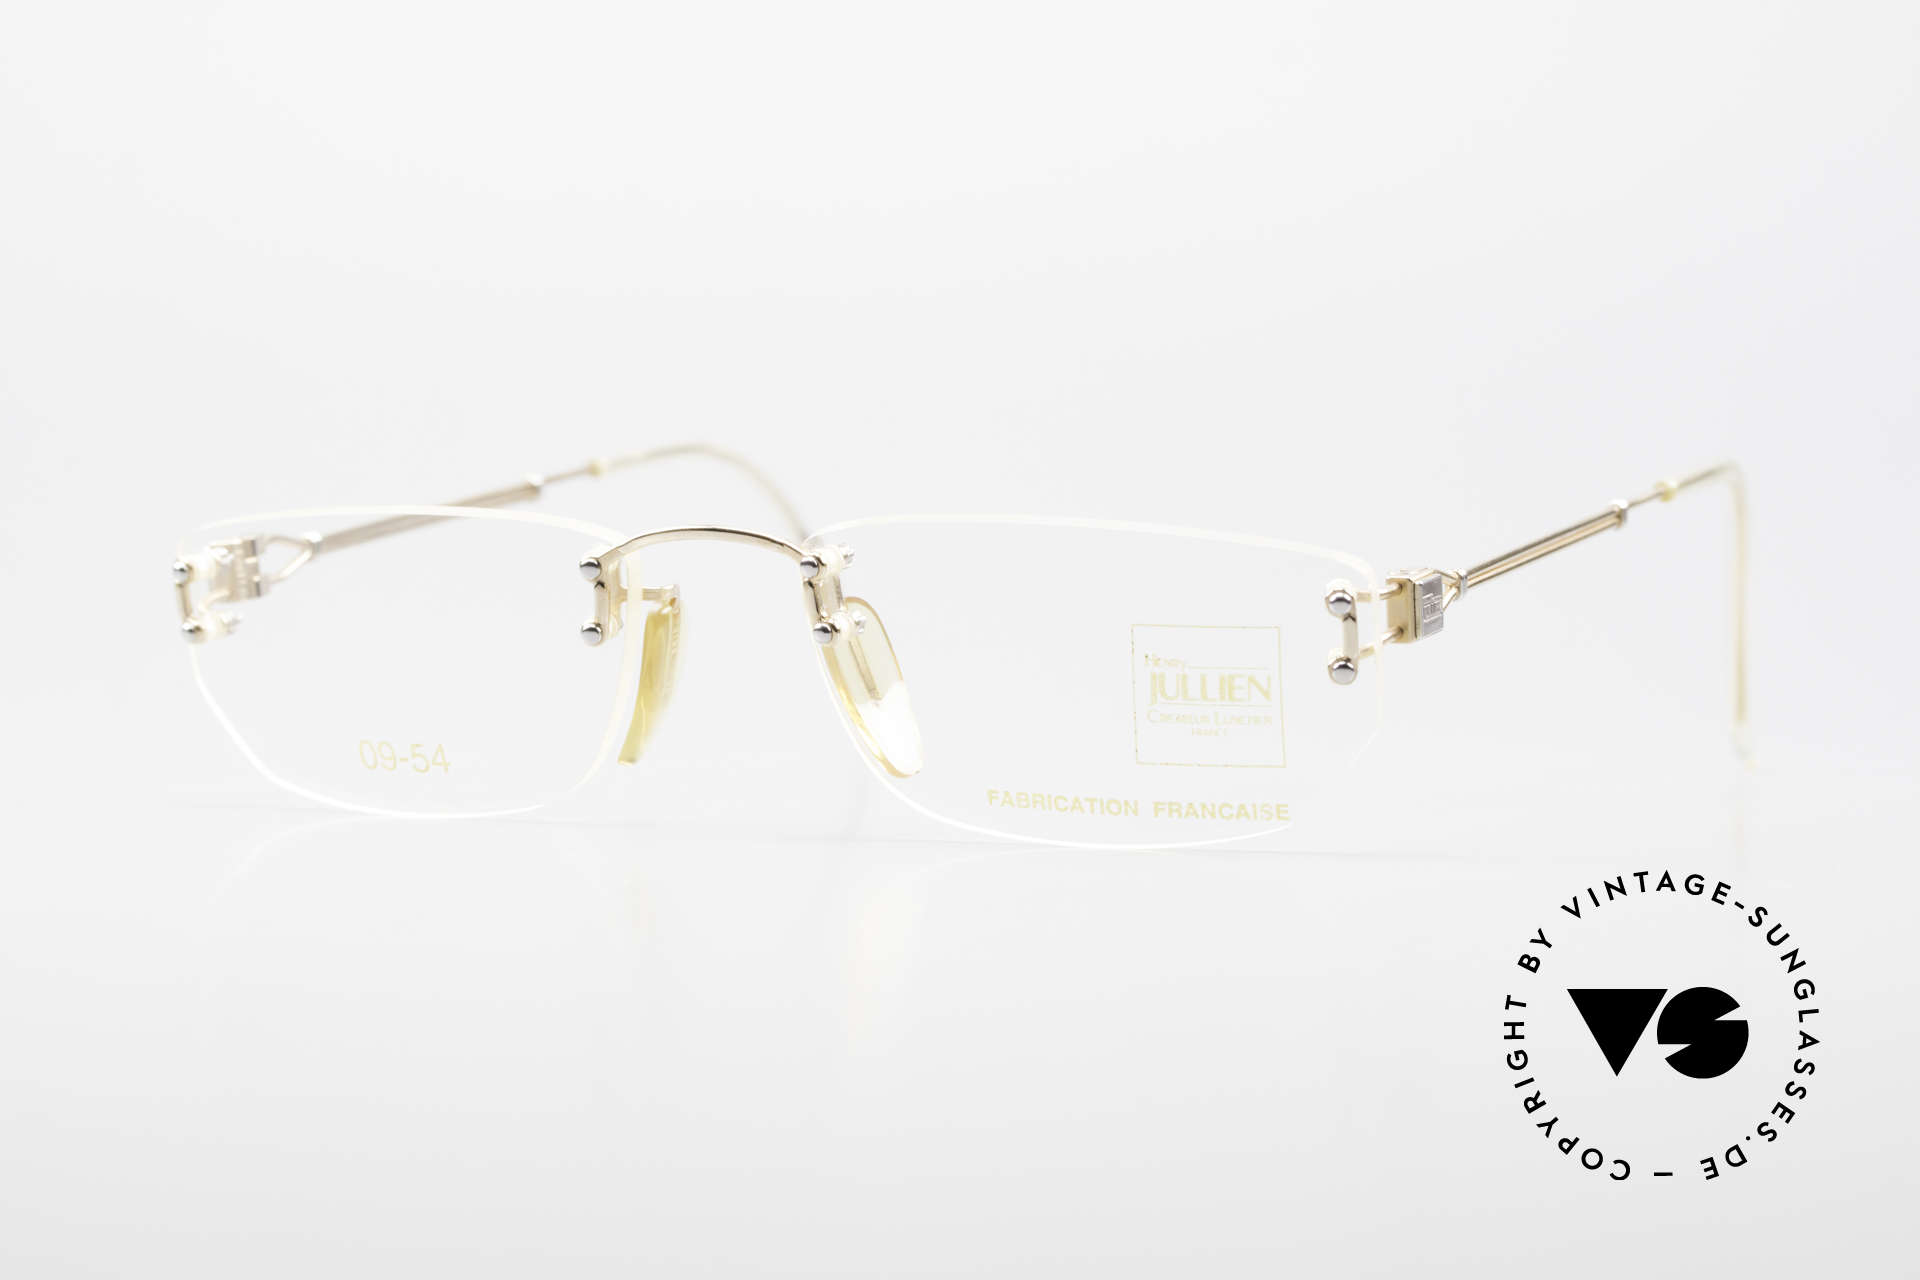 Henry Jullien Melrose 09 Rimless Vintage Frame 1994, accordingly top-notch, noble & precious frame finish, Made for Women